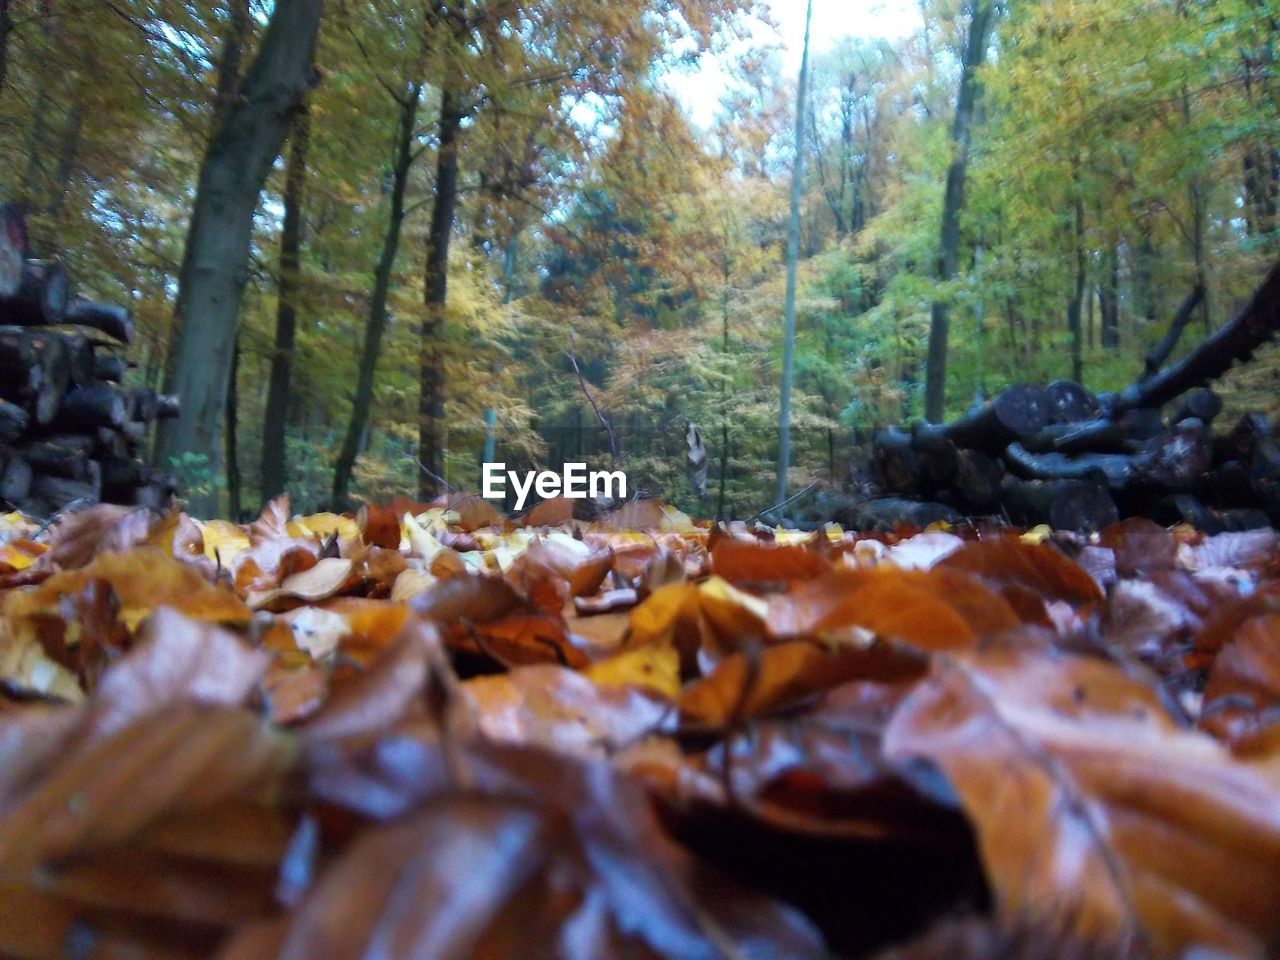 AUTUMN LEAVES ON TREES IN FOREST